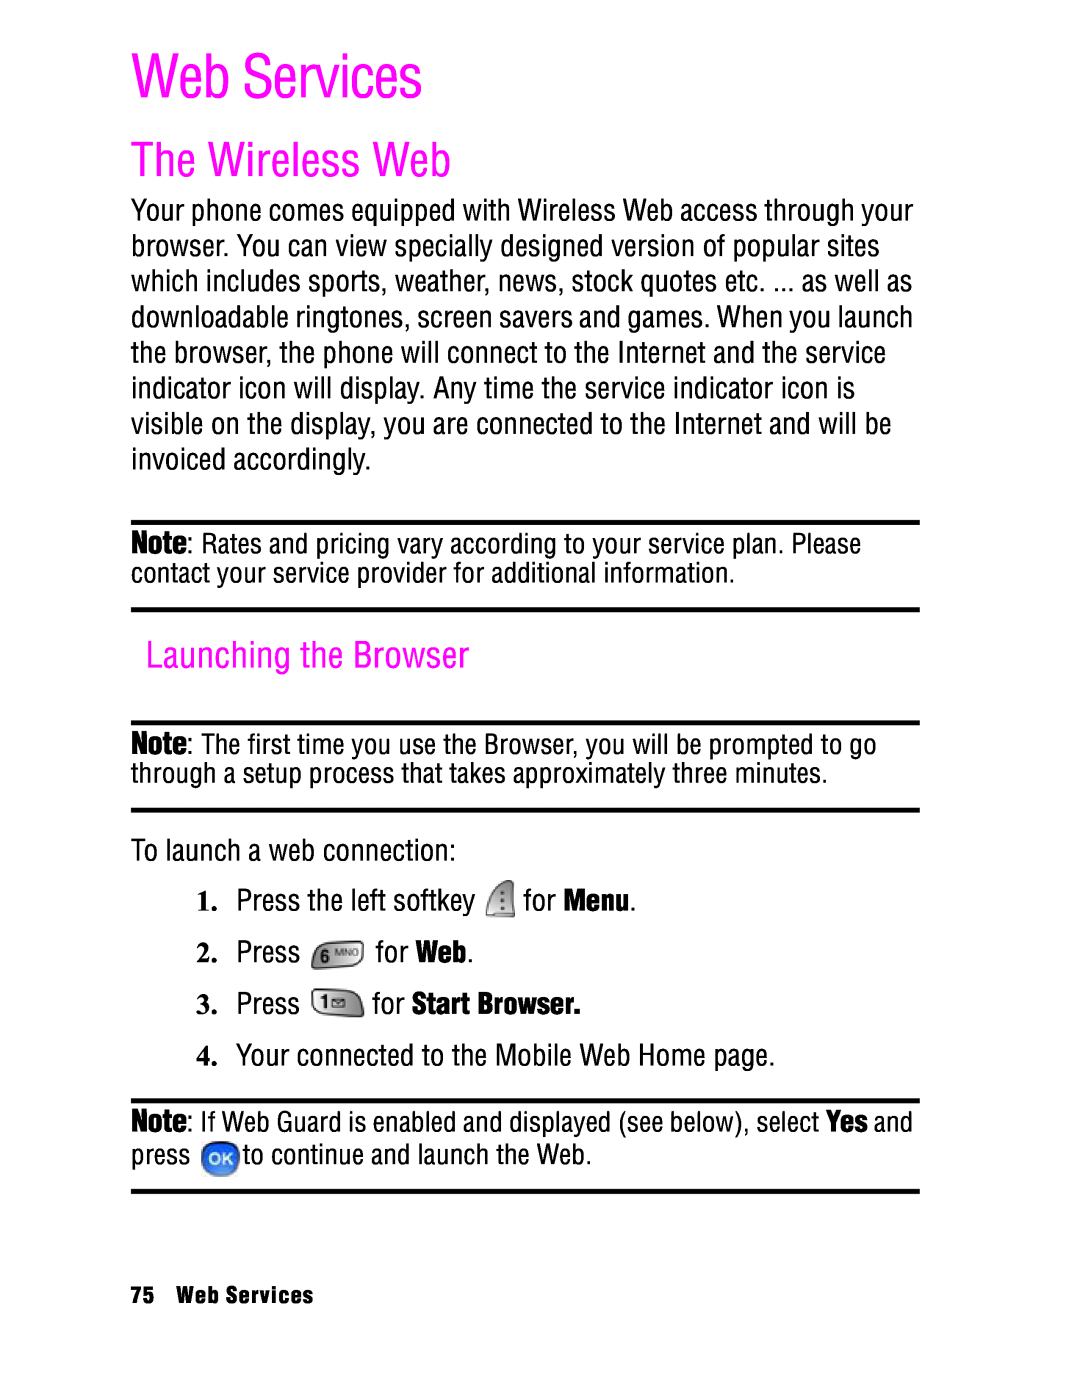 Samsung SPH-a740 manual Web Services, The Wireless Web, Launching the Browser, Press for Start Browser 